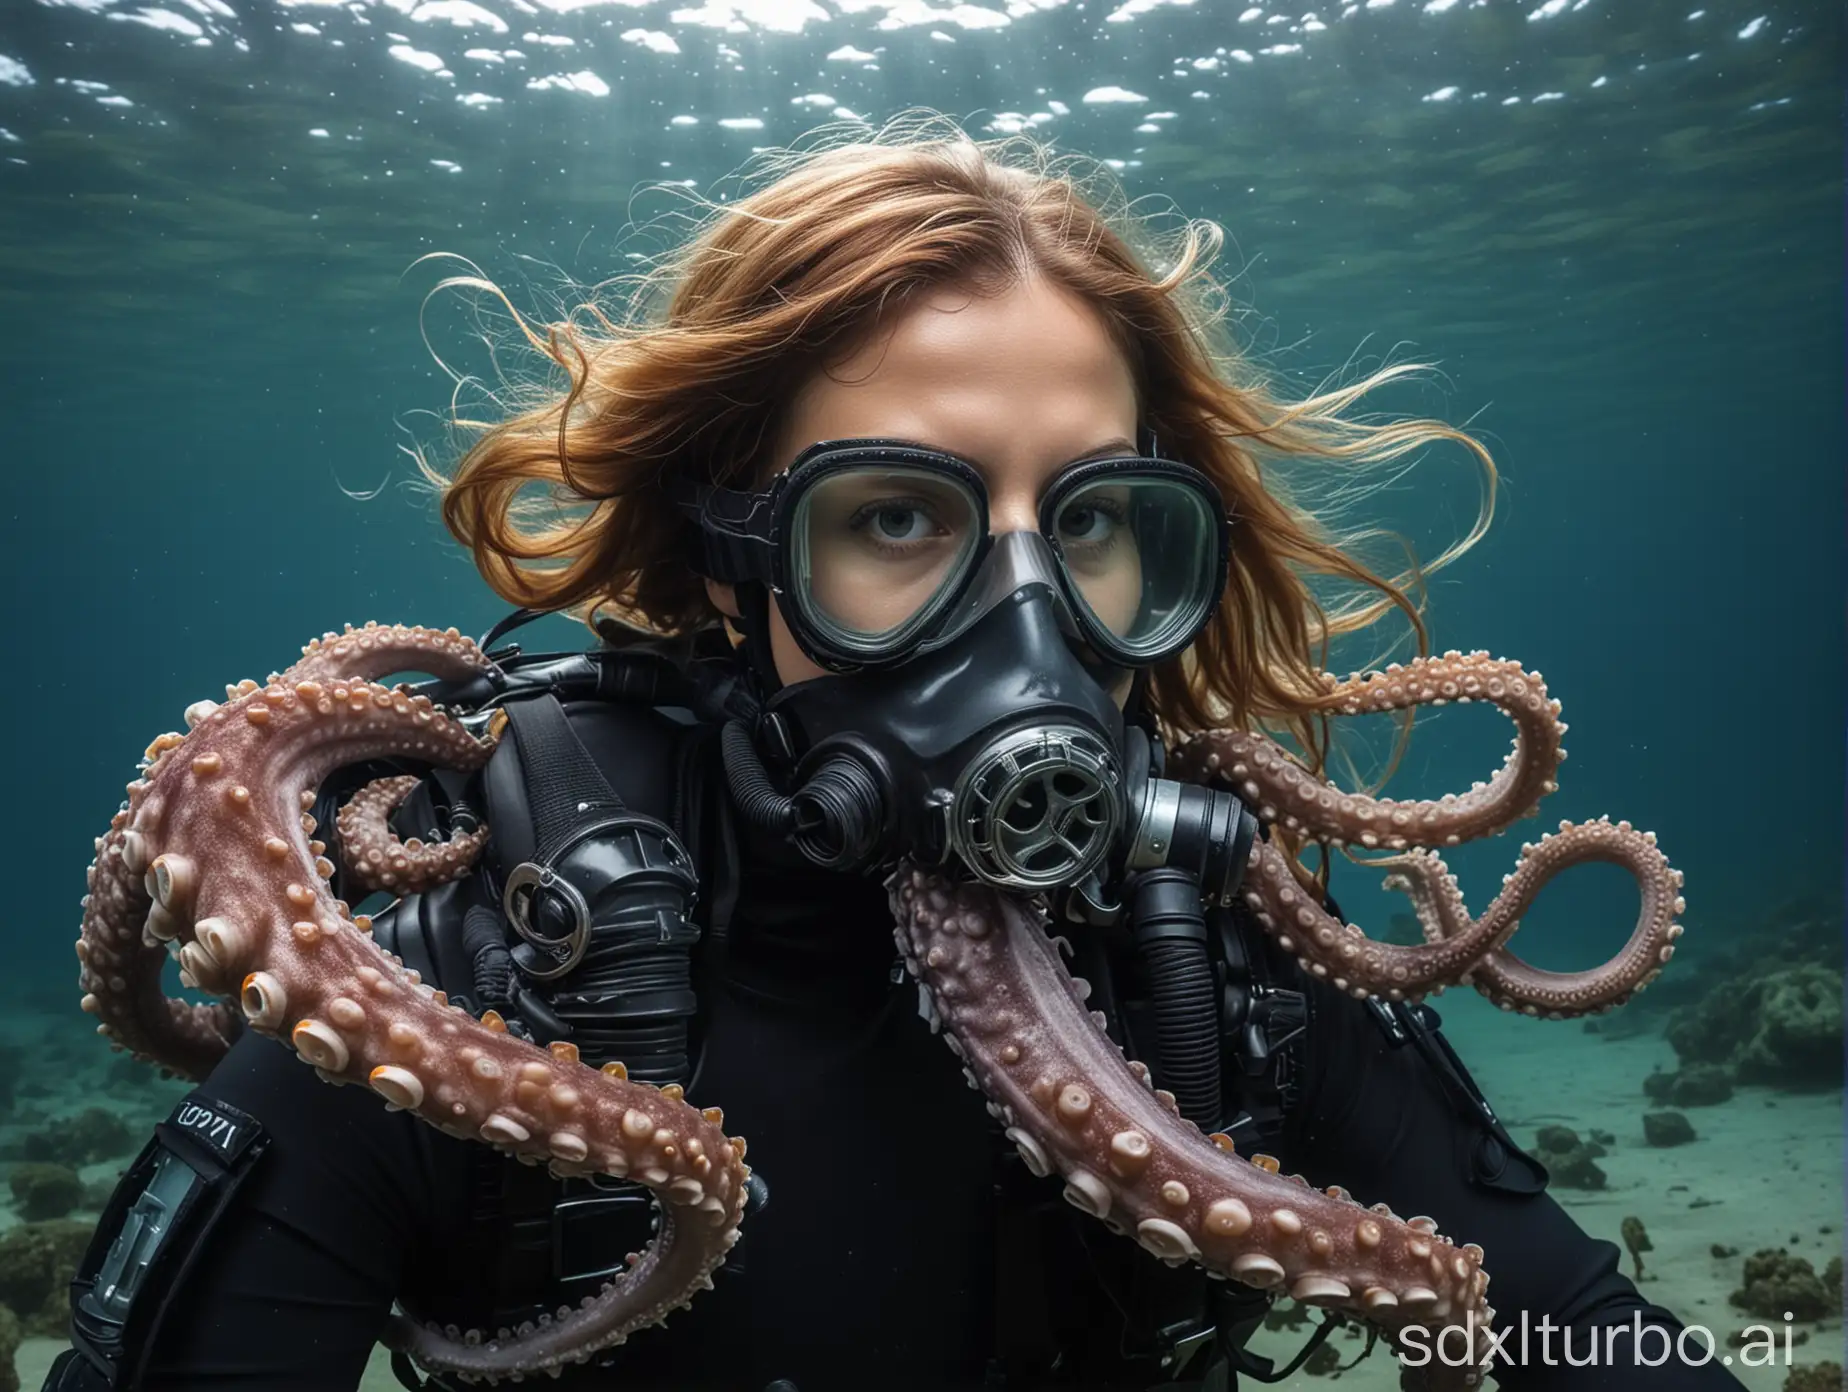 A woman dressed in a scuba diving suit, with a scuba diving mask on her face, a breathing apparatus for diving in her mouth, underwater, entwined by a large octopus